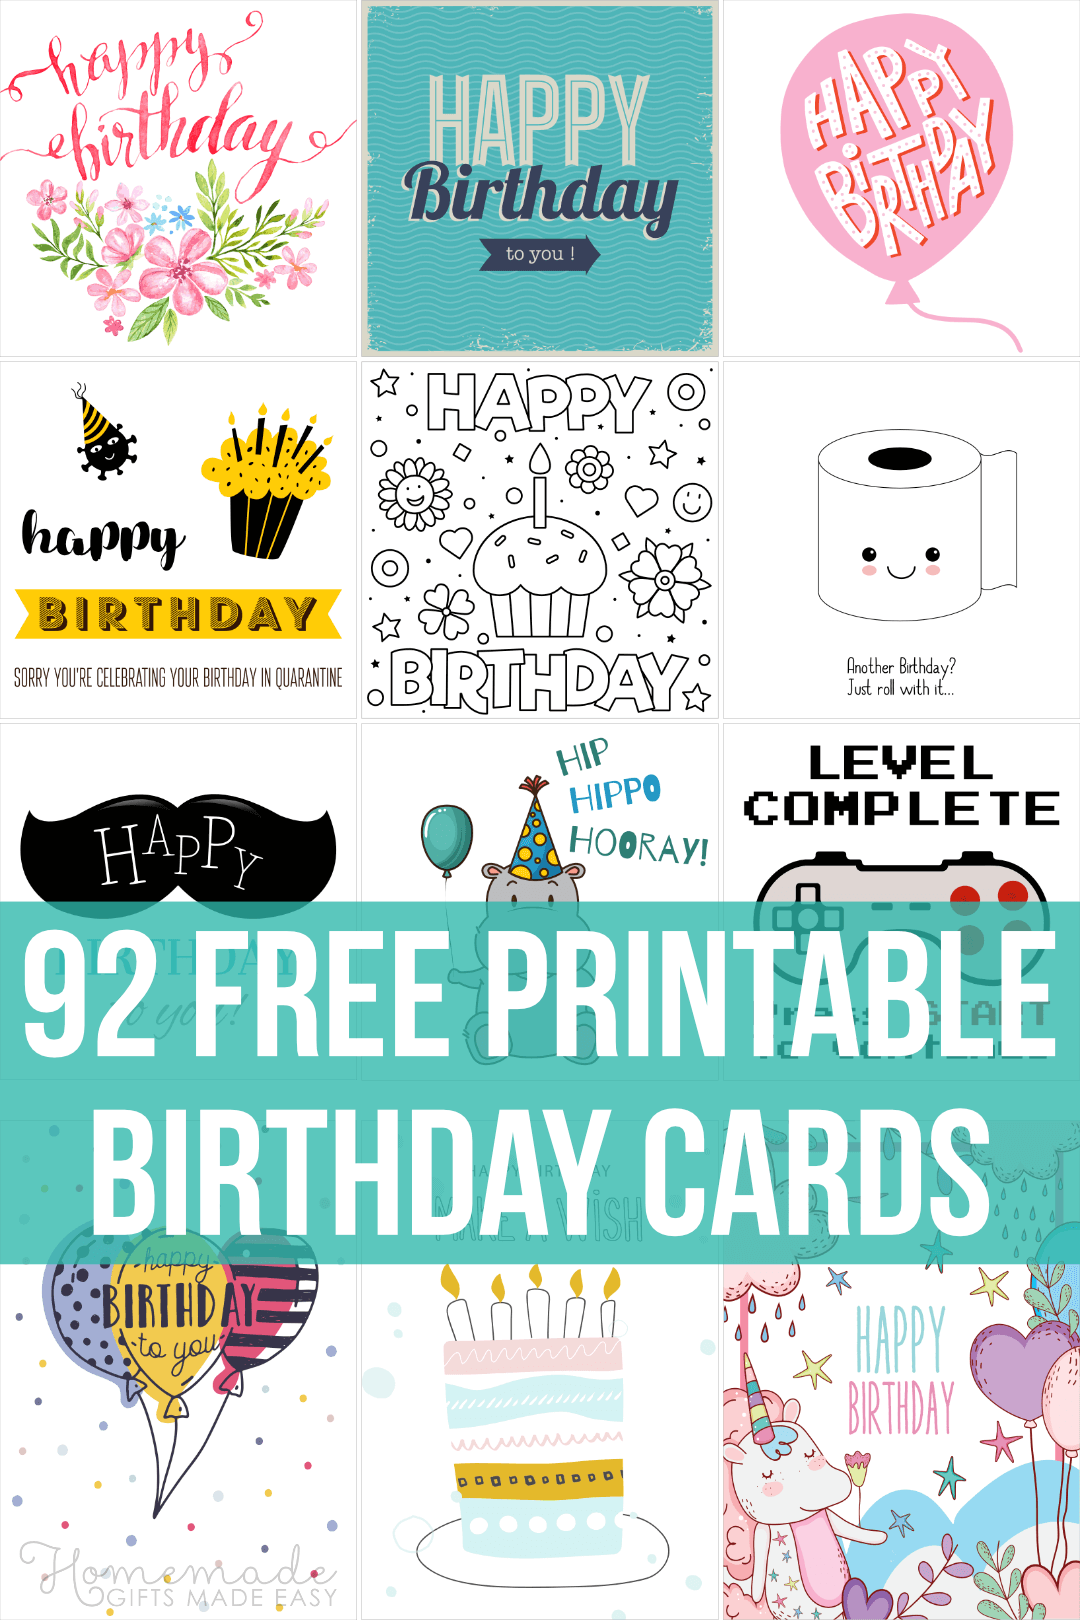 20 Free Printable Birthday Cards For Him, Her, Kids and Adults Intended For Foldable Birthday Card Template